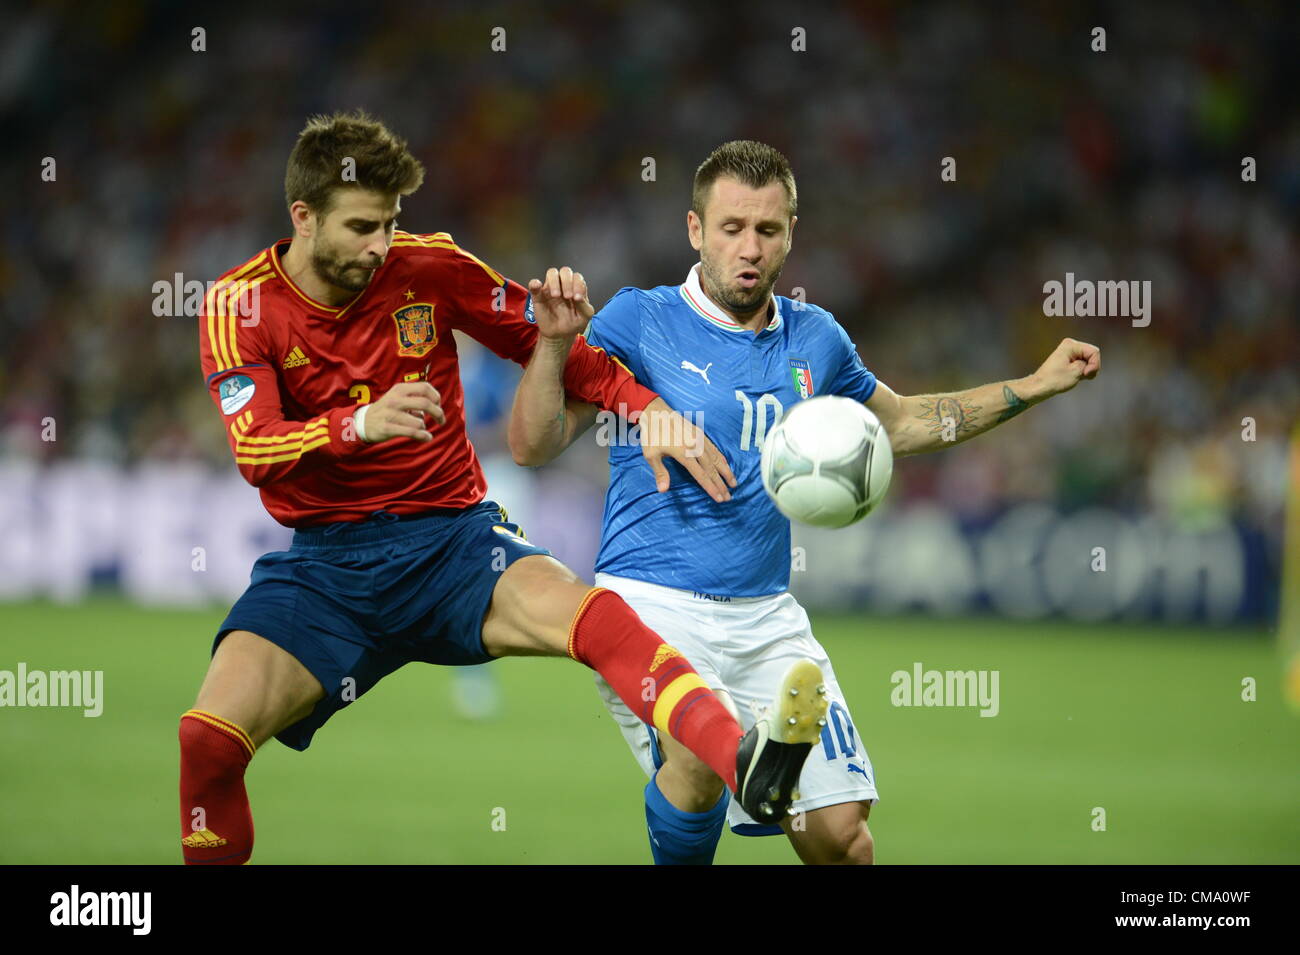 01.07.2012 Kiev, Ukraine.  Spain's Gerard Pique (L) and Italy's Antonio Cassano challenge for the ball during the UEFA EURO 2012 final soccer match Spain vs. Italy at the Olympic Stadium in Kiev, Ukraine, 01 July 2012. Stock Photo